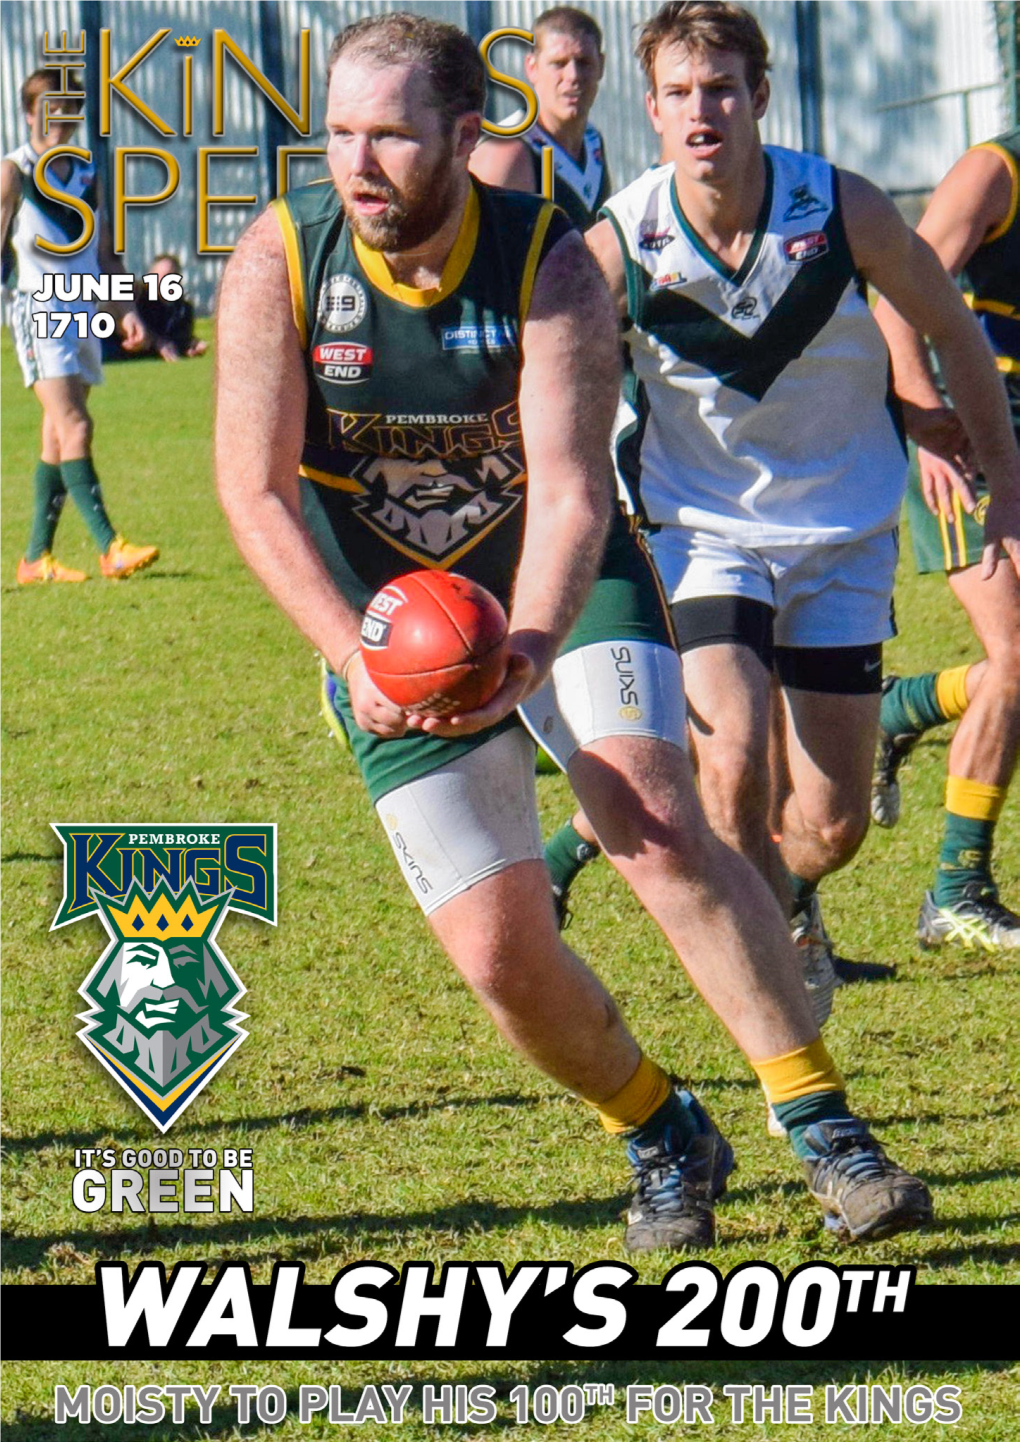 THE PEMBROKE KINGS PEMBROKE OLD SCHOLARS FOOTBALL CLUB IT’S GOOD to BE GREEN 2017 Pembrokekings.Com.Au Friday June 16Th 2017 Round 10 - Athelstone Home